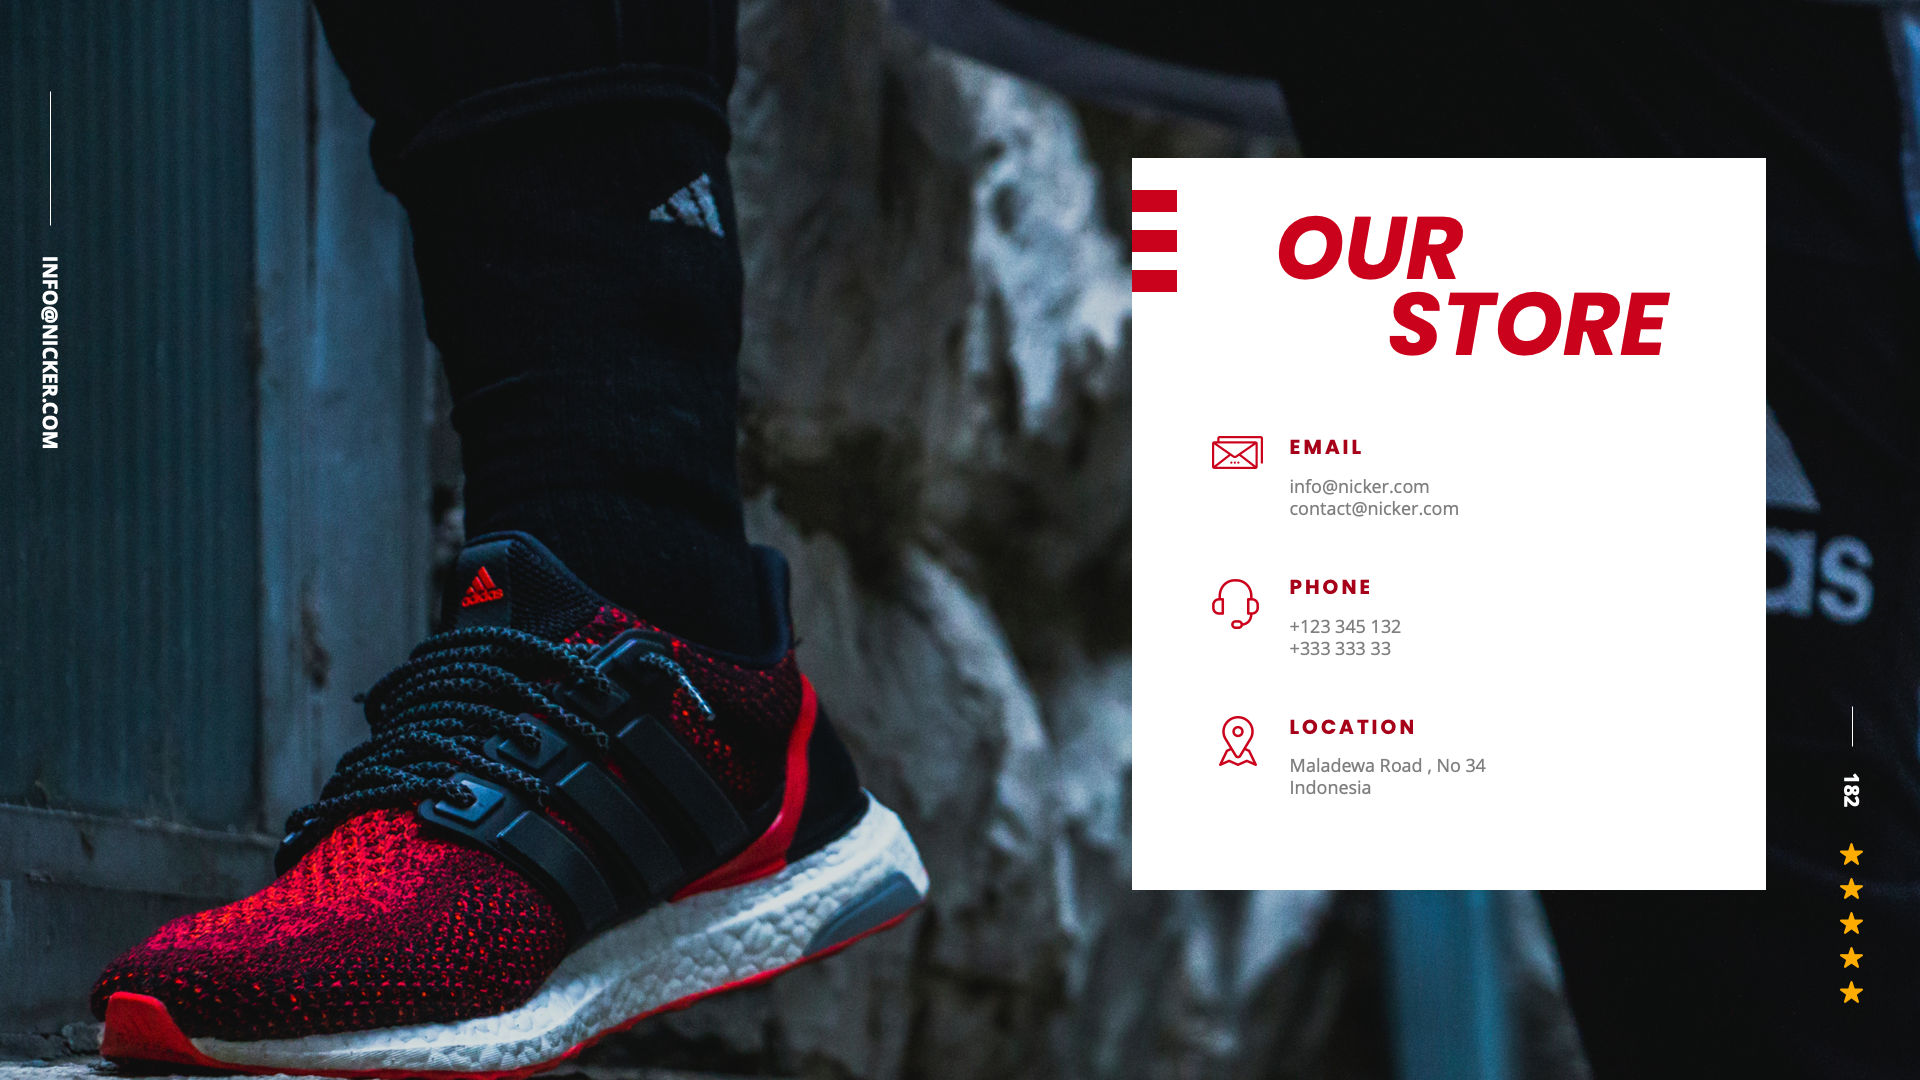 Nicker Shoes & Sneakers Google Slides Template by